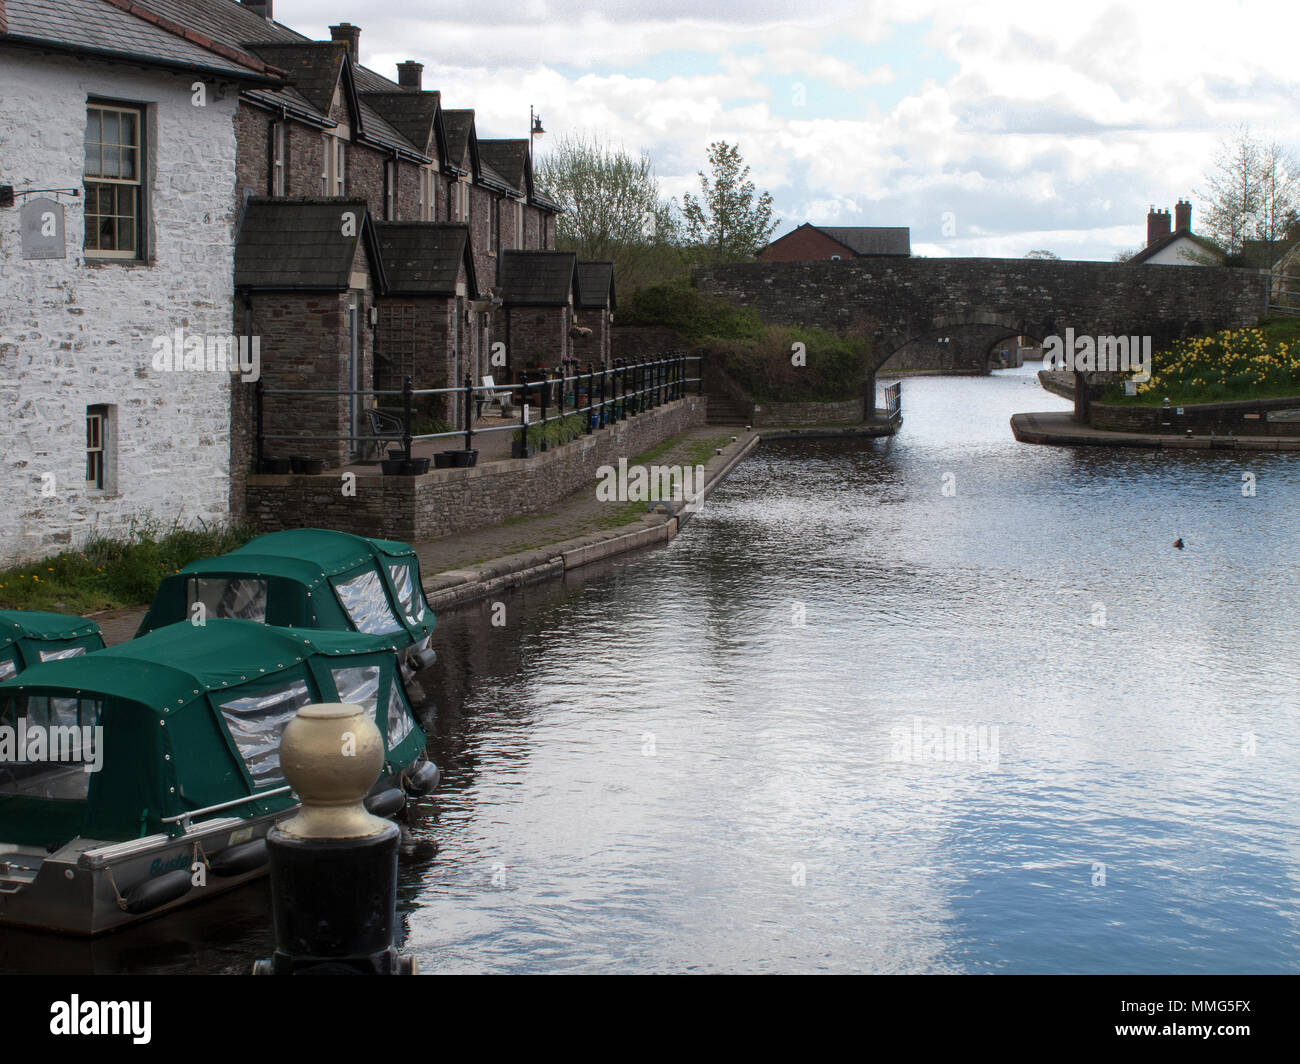 Views along part of the Brecon and Monmouth Canal in Wales,UK Stock Photo